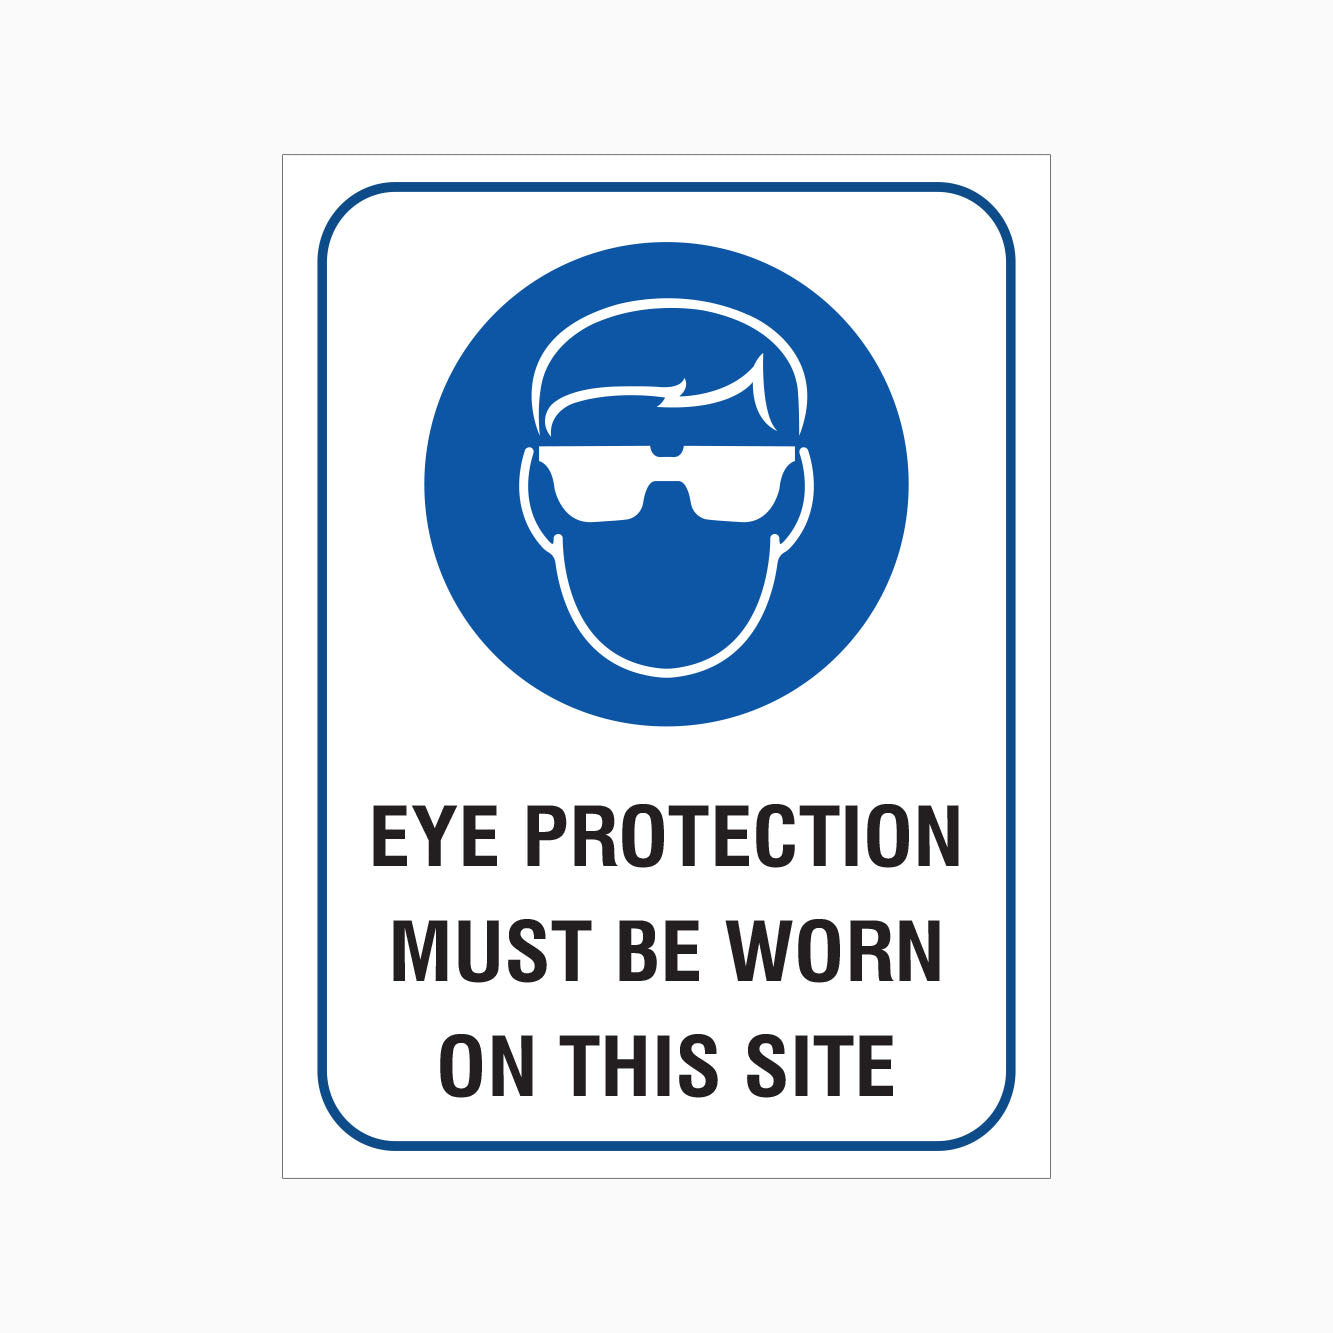 EYE PROTECTION MUST BE WORN ON THIS SITE SIGN - GET SIGNS